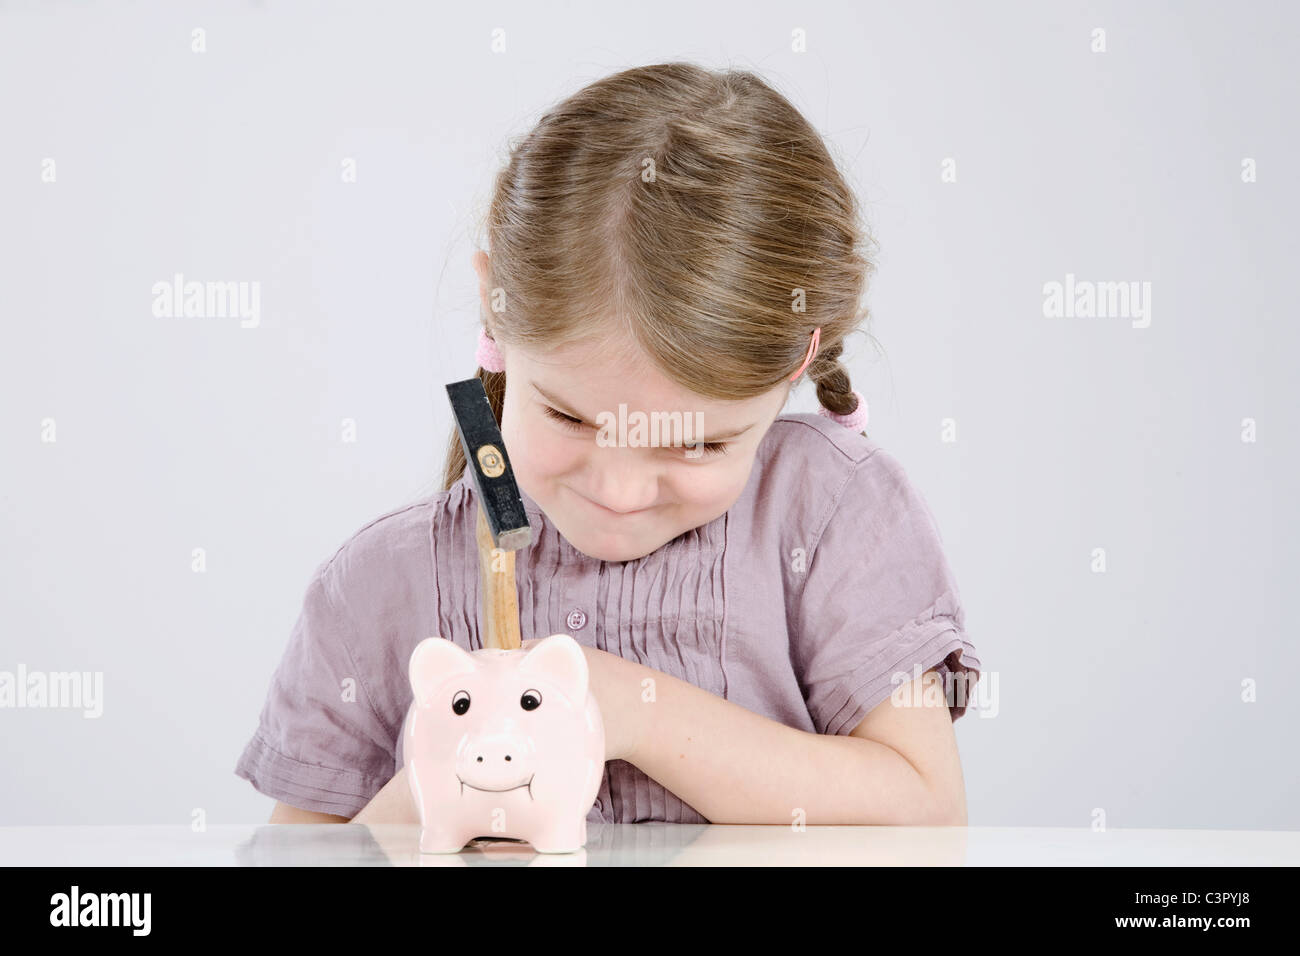 Girl (4-5) with a hammer is about to break a piggybank Stock Photo